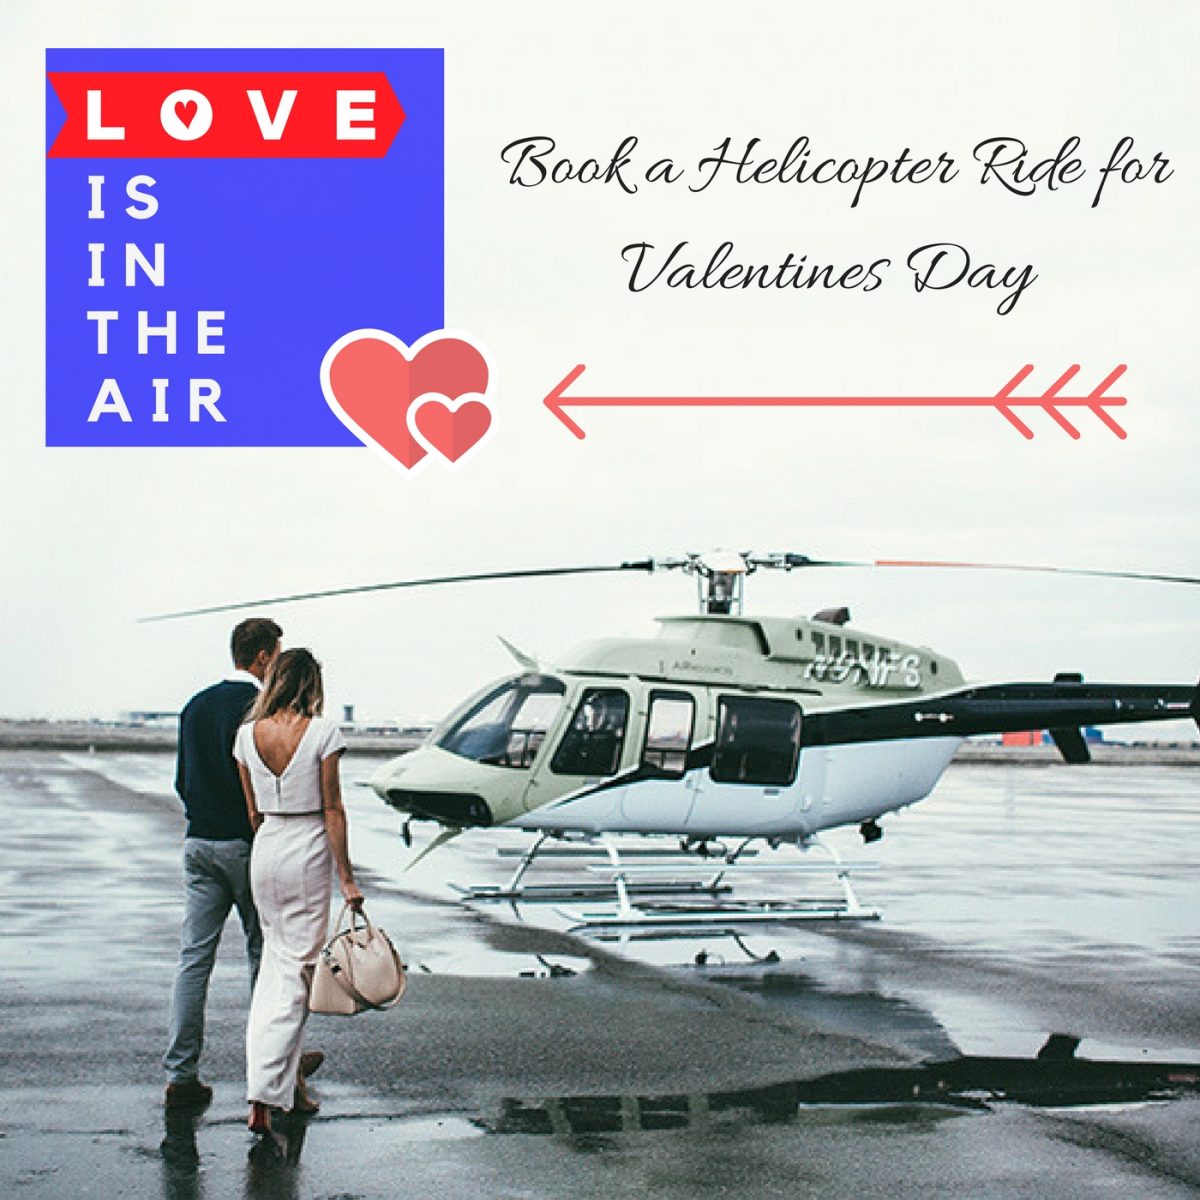 Plan a Helicopter Joy Ride This Valentines Day